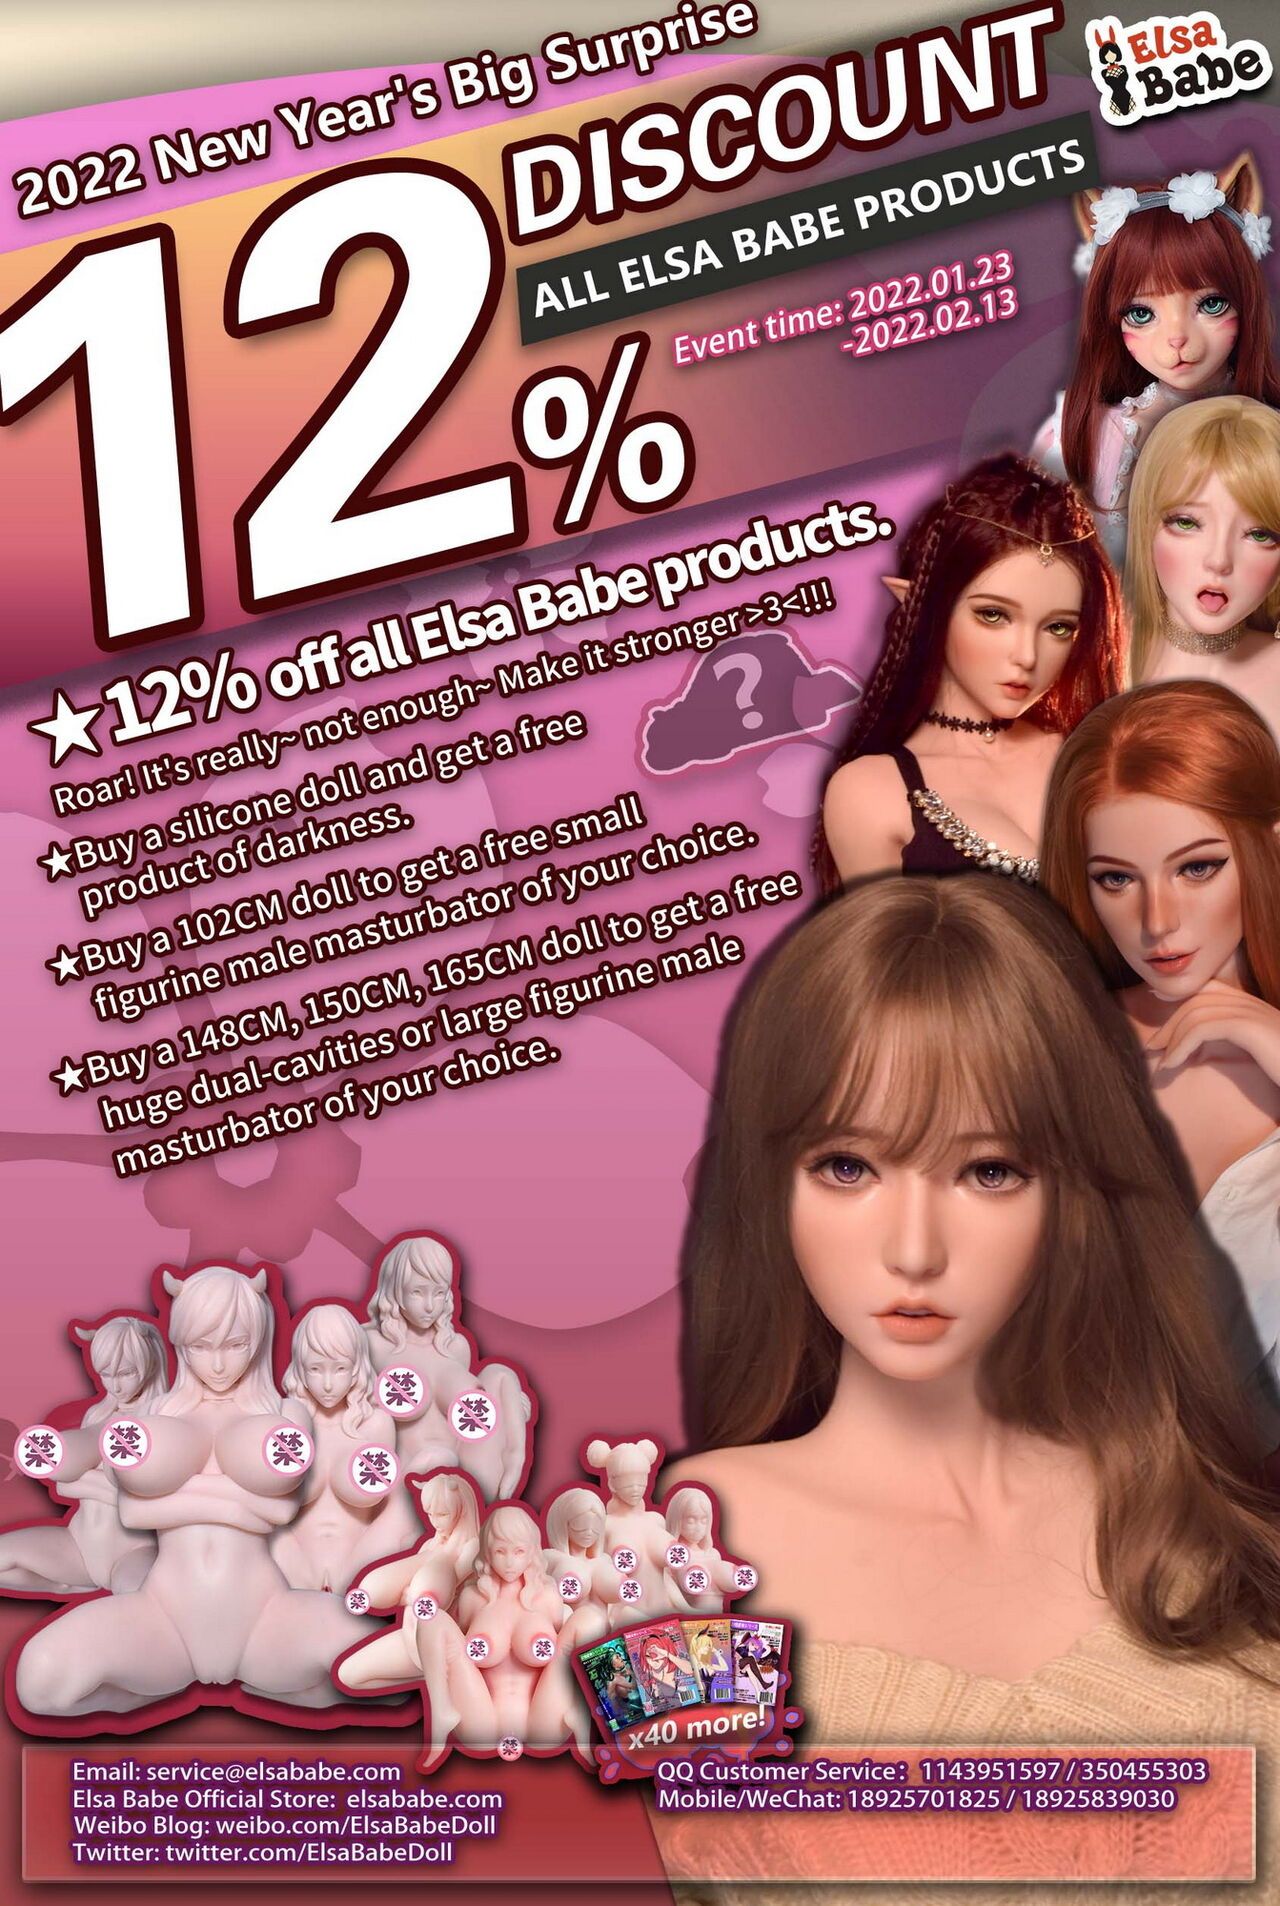 Elsa Babe [2022 New Year's Big Surprises] Discounts + Endless Gifts! 2021.01.23 1